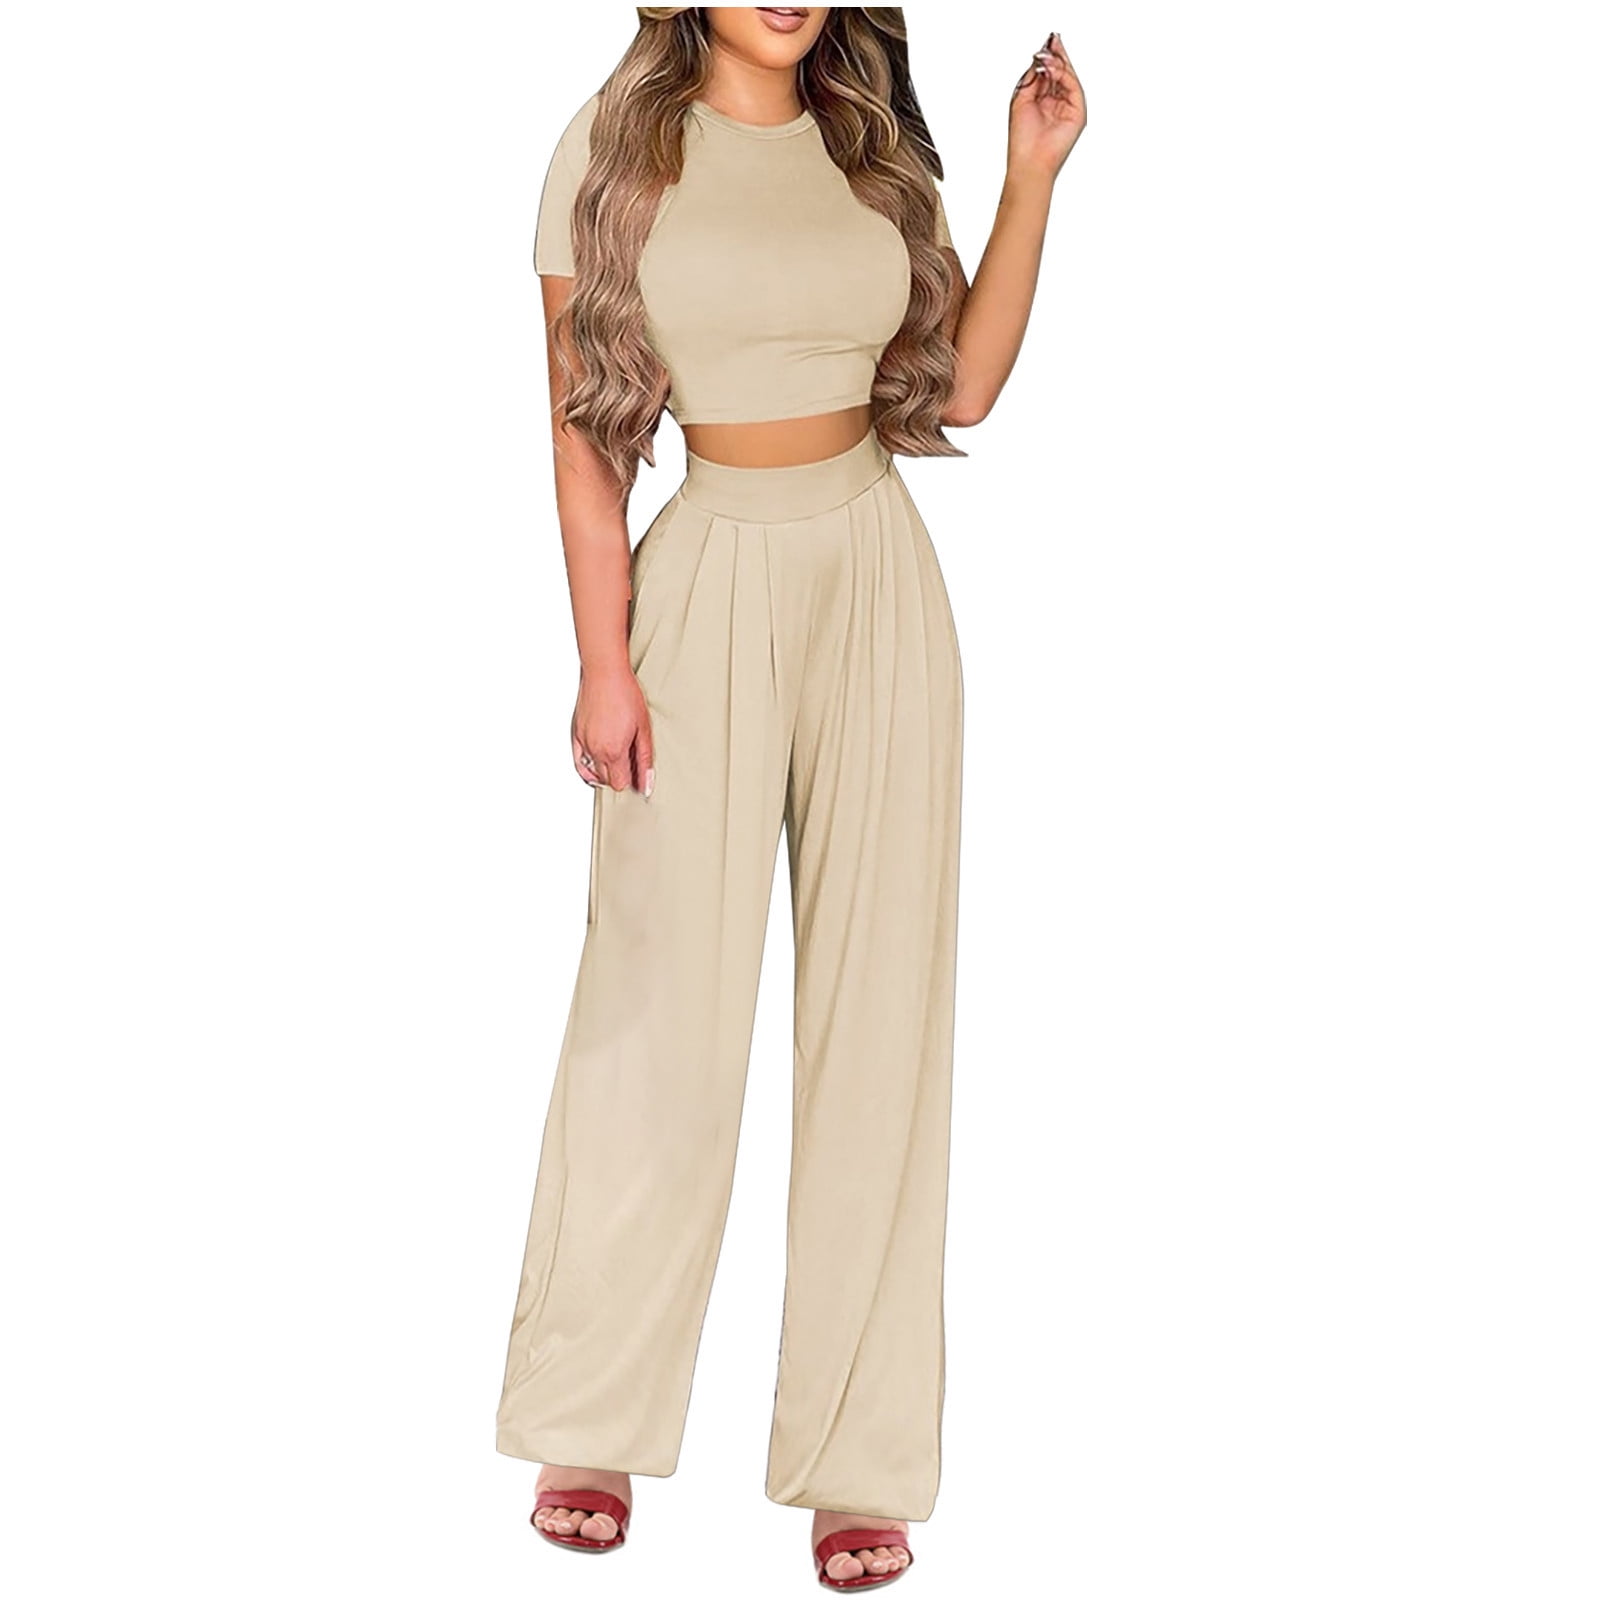 RQYYD Reduced Casual Summer 2 Piece Outfits for Women Short Sleeve Crop Top  High Waist Wide Leg Pants Sets Floral Pleated Plus Size Lounge Set Khaki XL  